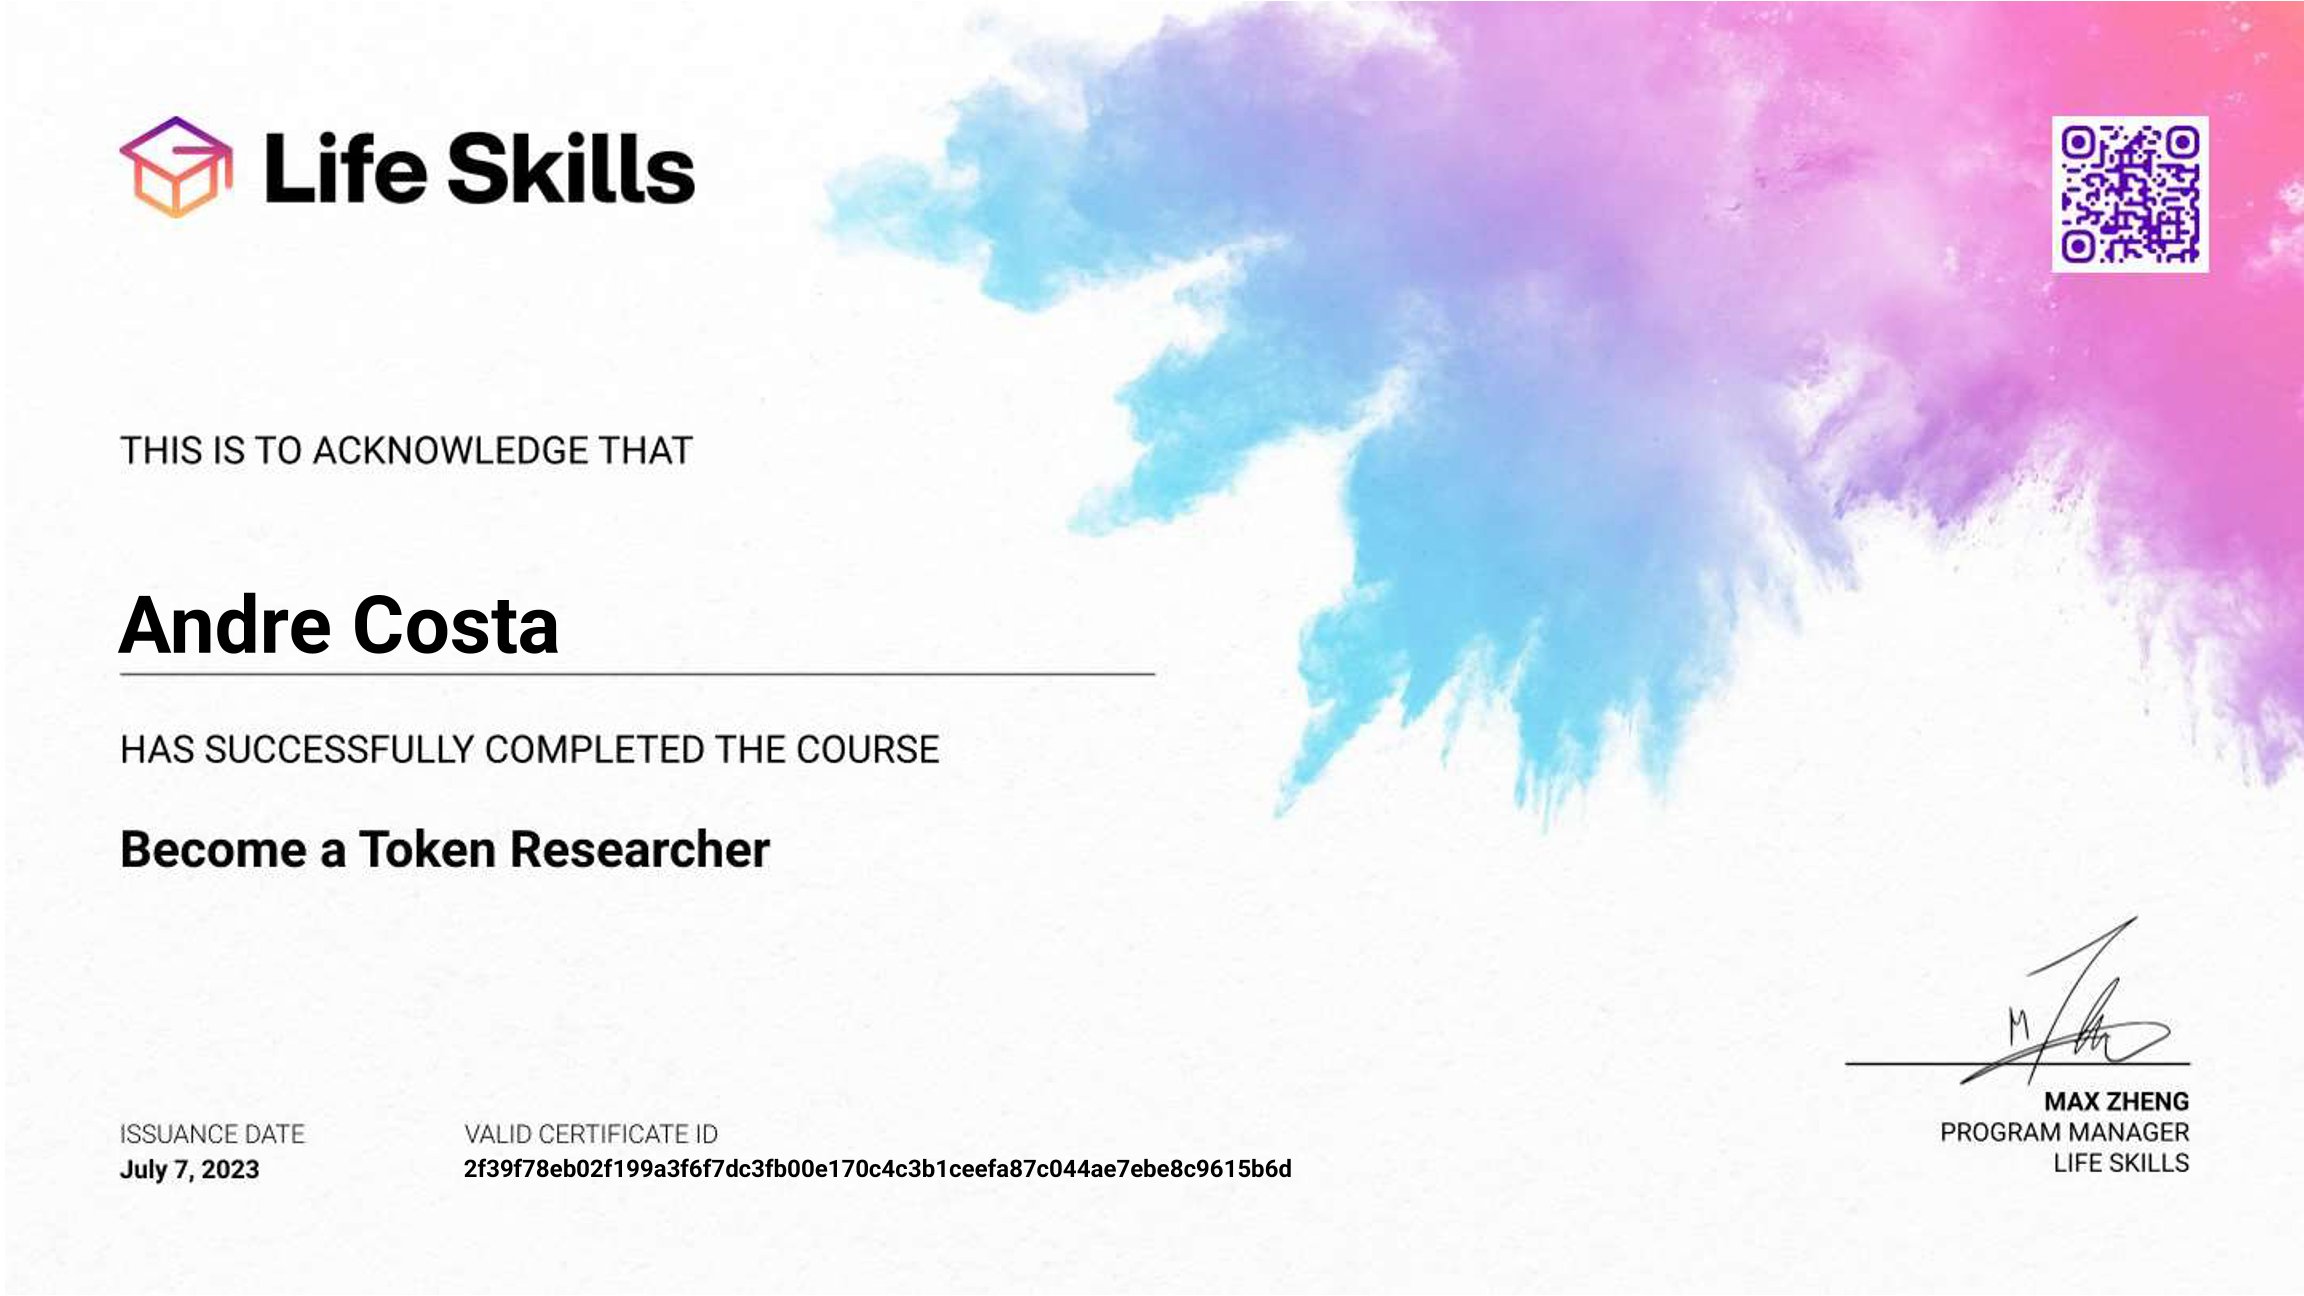 Life Skills - Become a Token Researcher - Andre Costa - Certificate